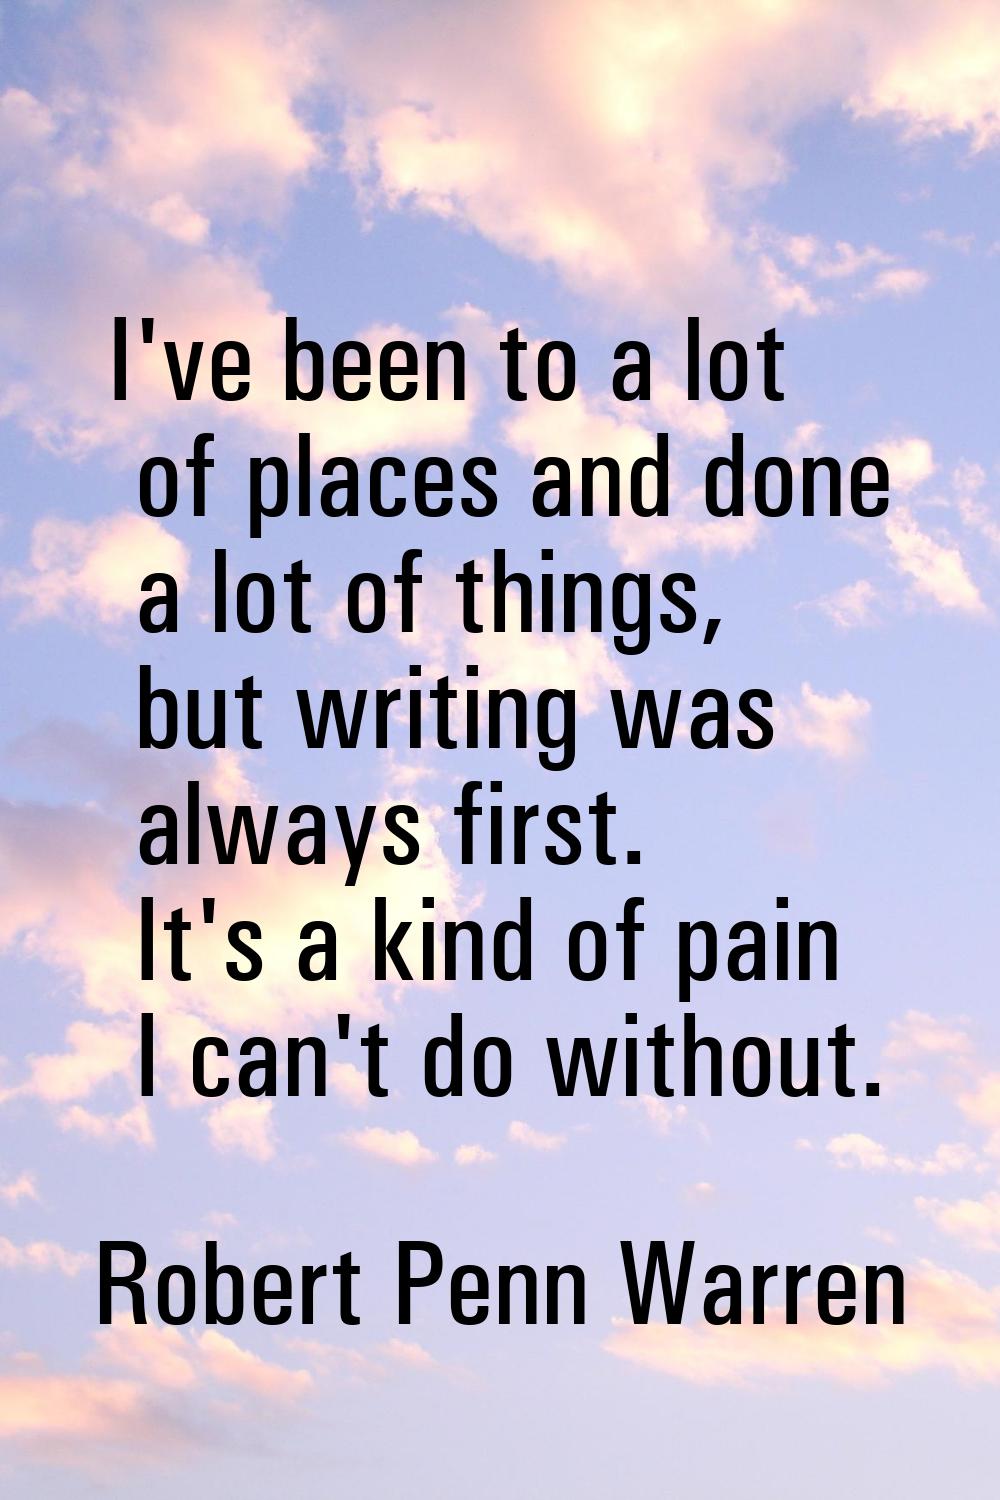 I've been to a lot of places and done a lot of things, but writing was always first. It's a kind of